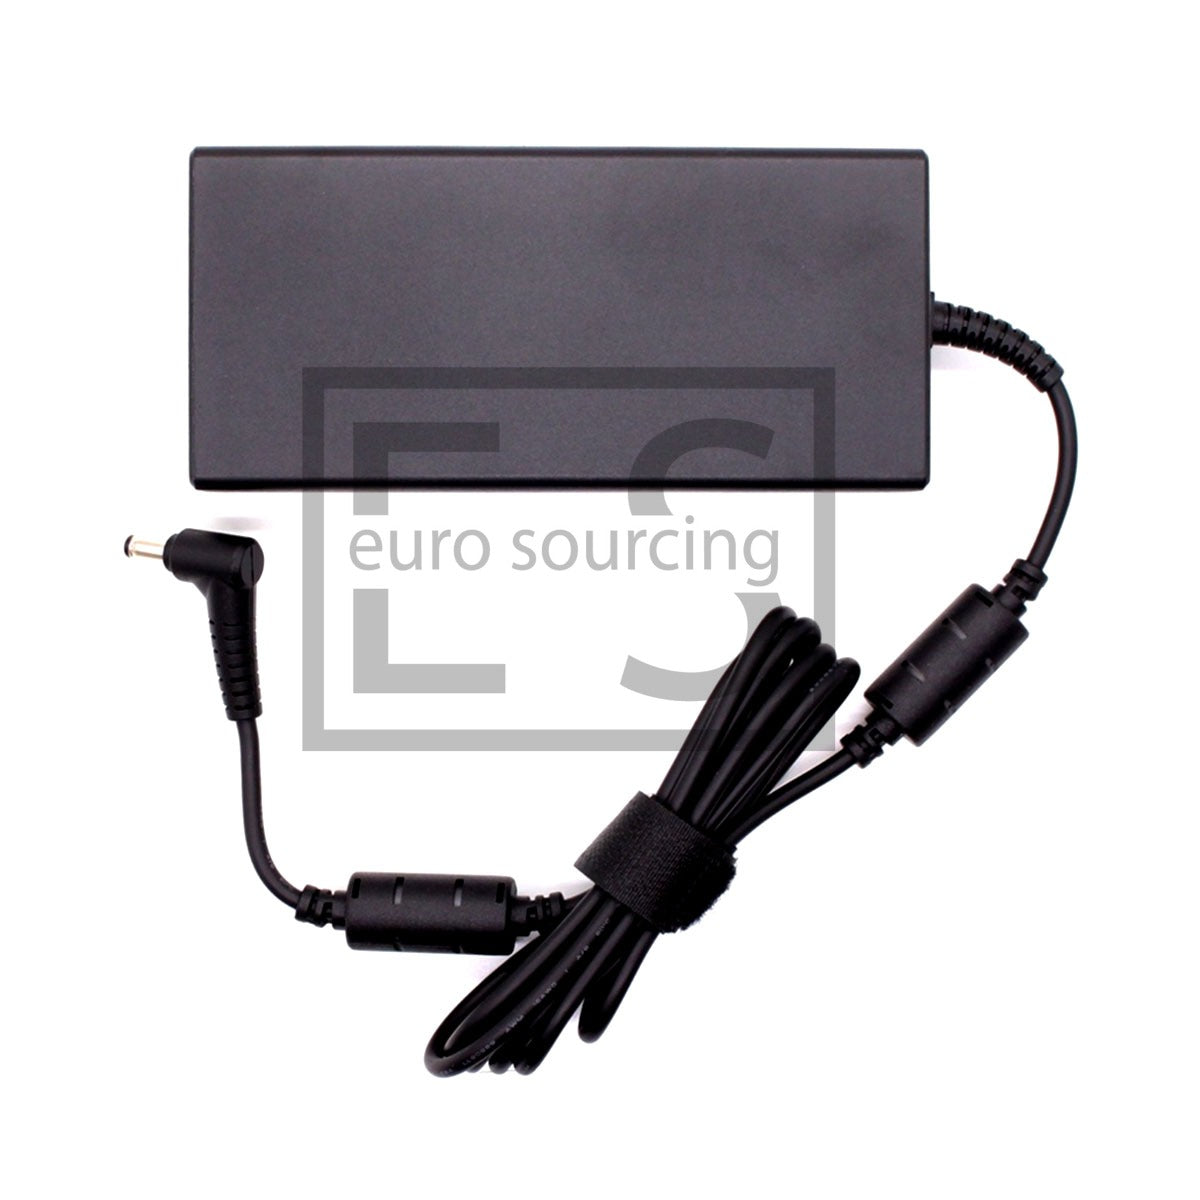 Genuine Delta 180W 19.5V 9.23A 5.5MM x 1.7MM Gaming Laptop Adapter Power Supply Compatible With ACER NITRO 5 AN515-41-11CP